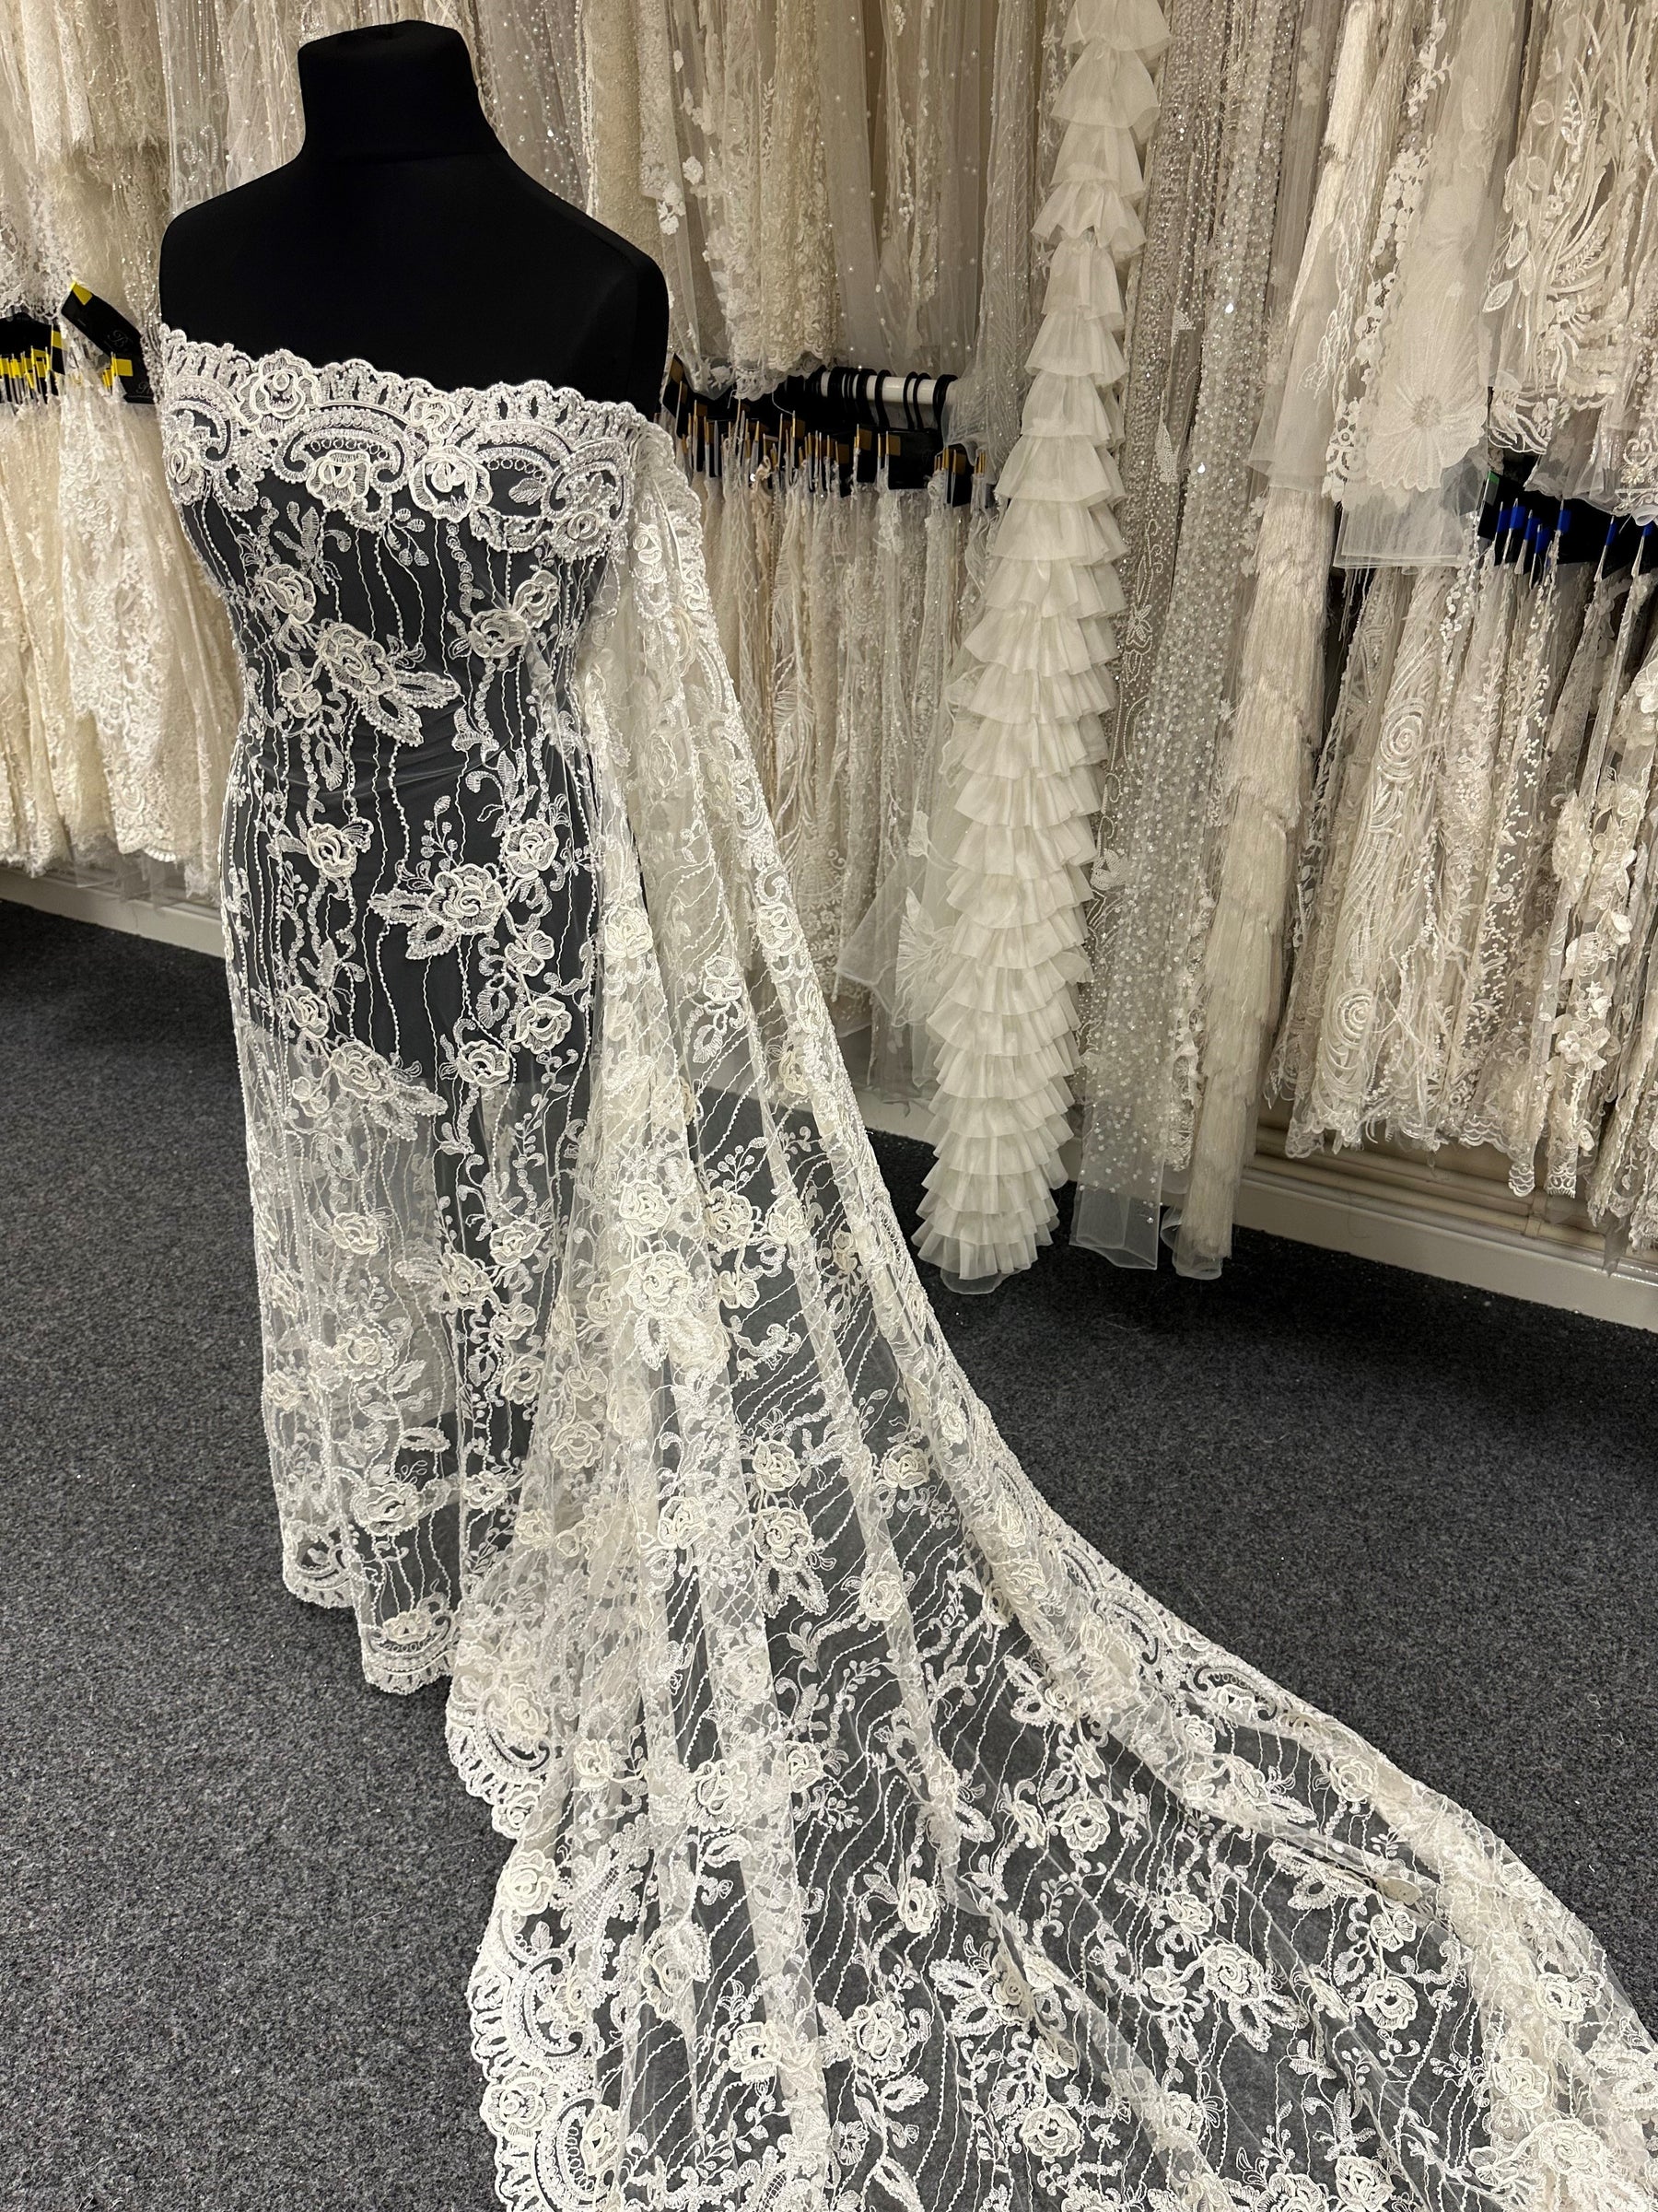 Ivory Corded and Beaded Lace – Rochelle